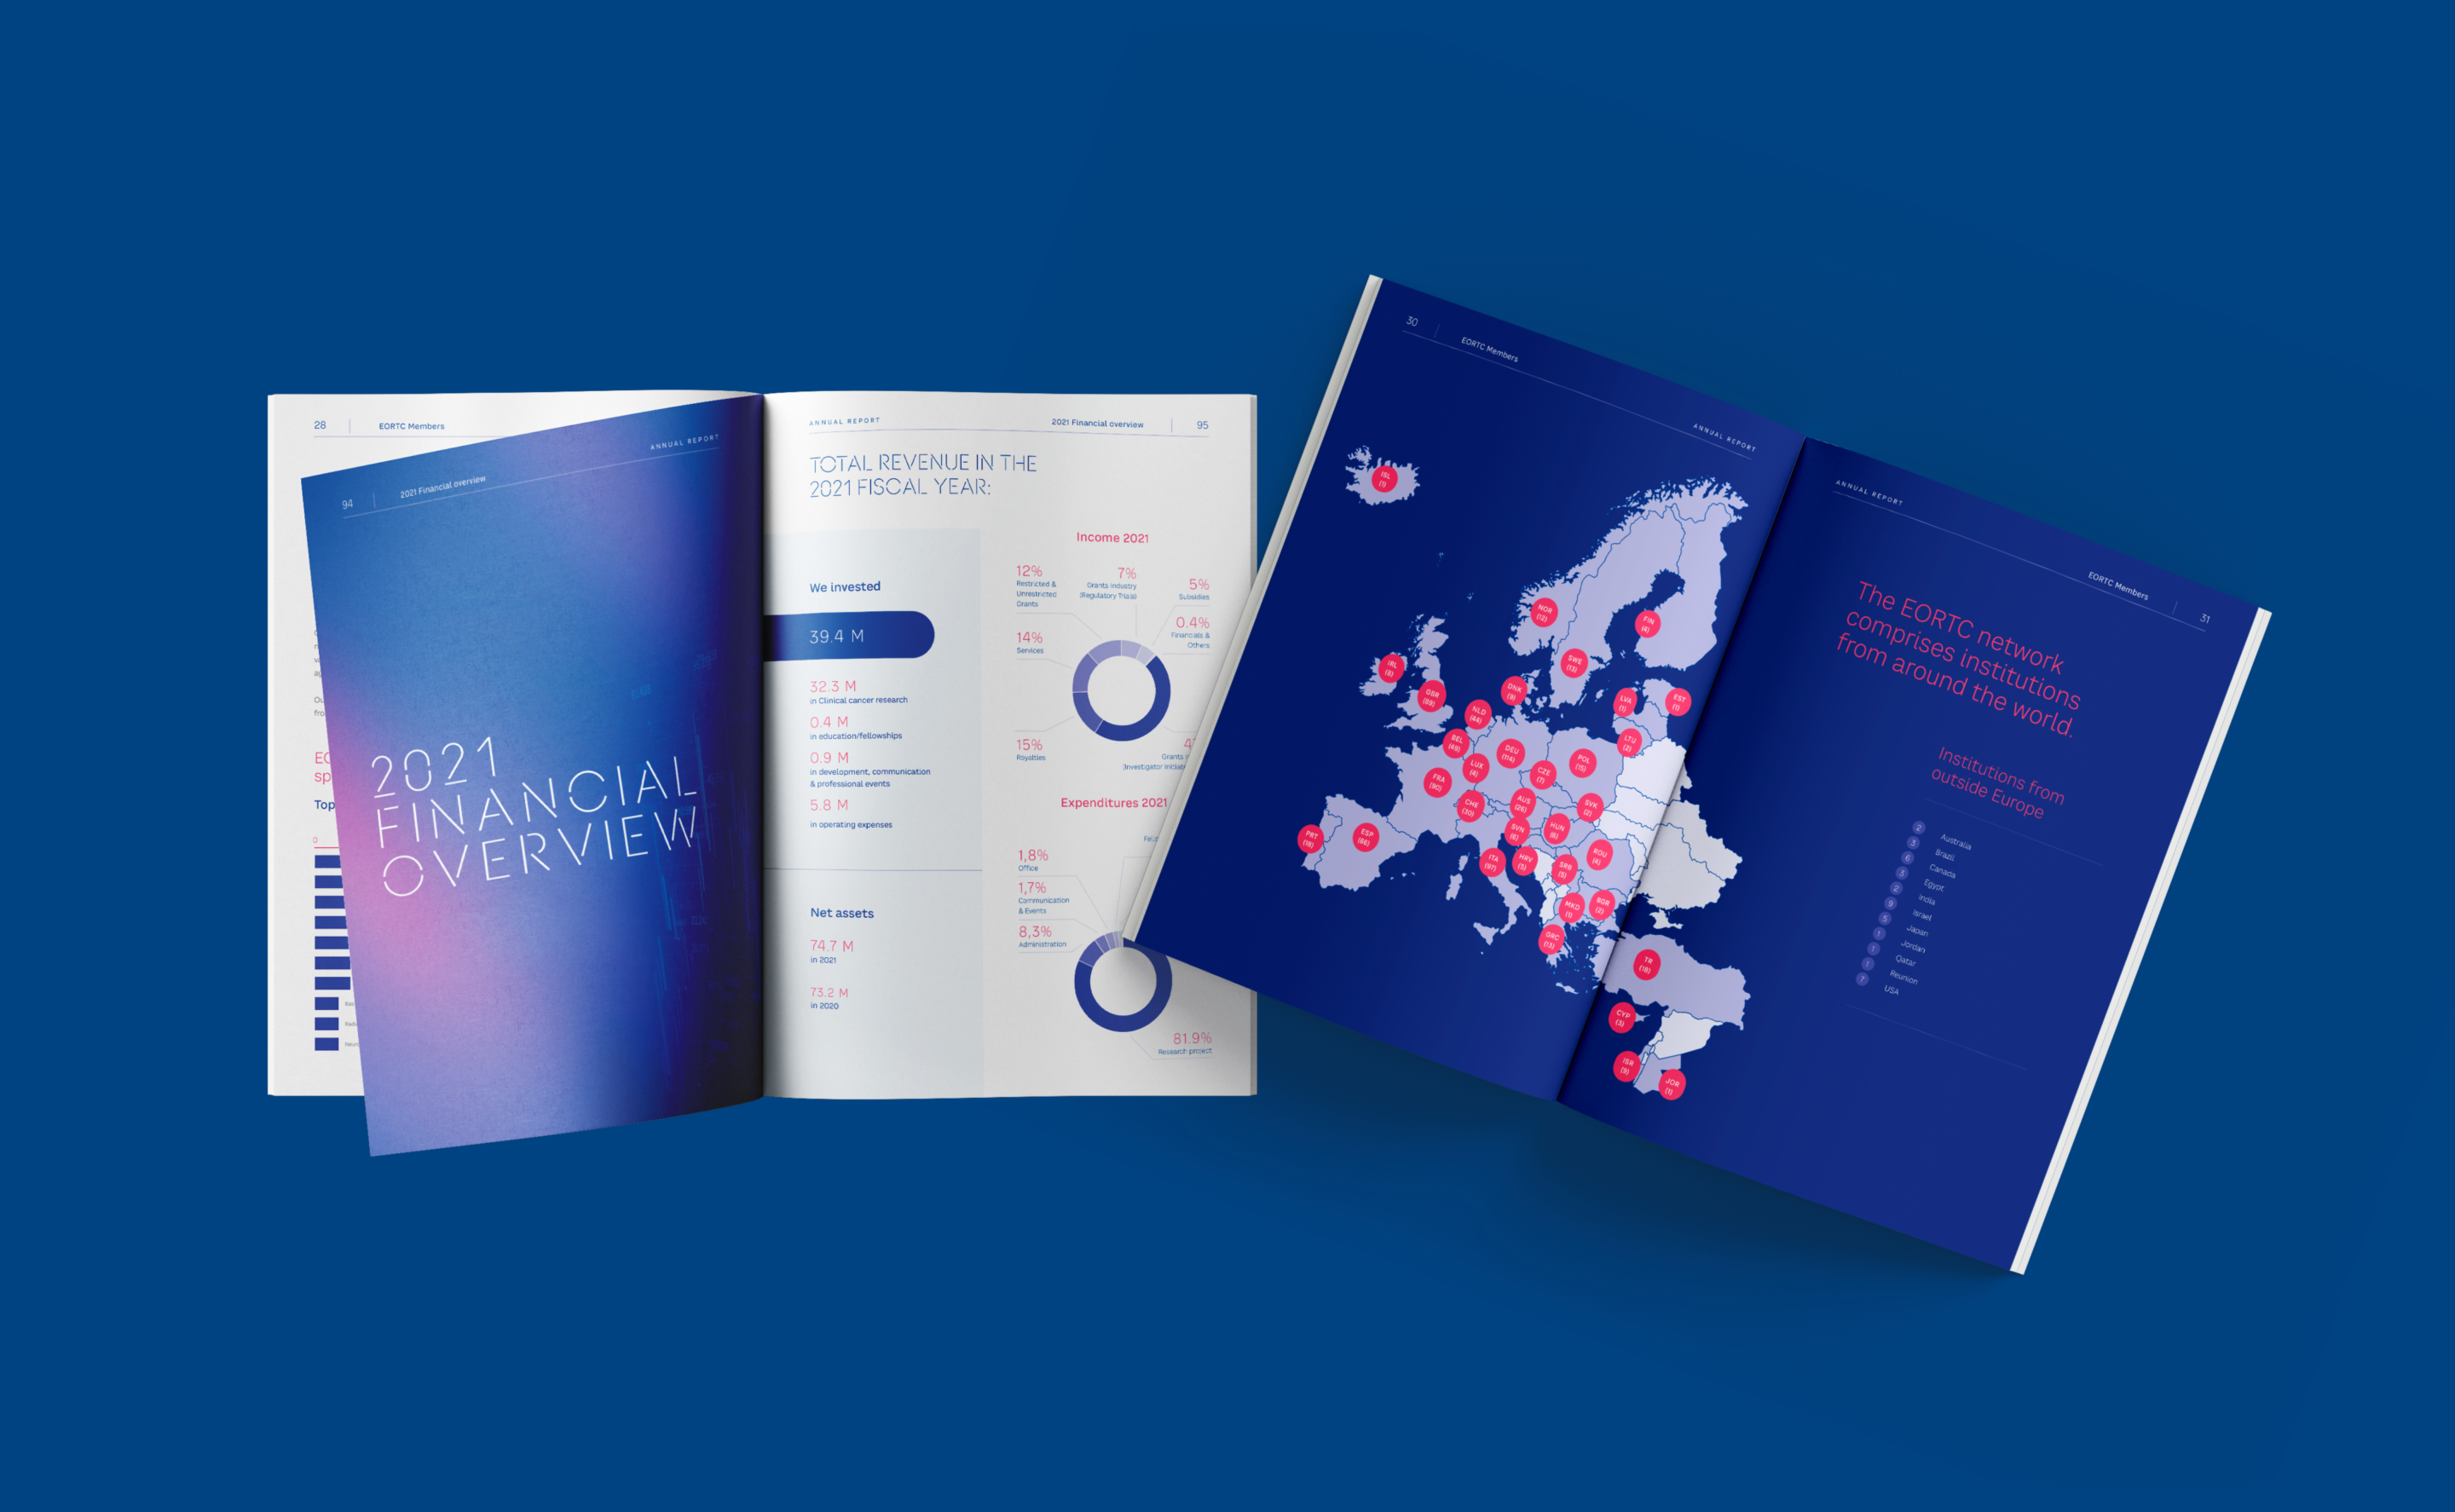 Some examples of infographics for the EORTC Annual Report by Atelier Design